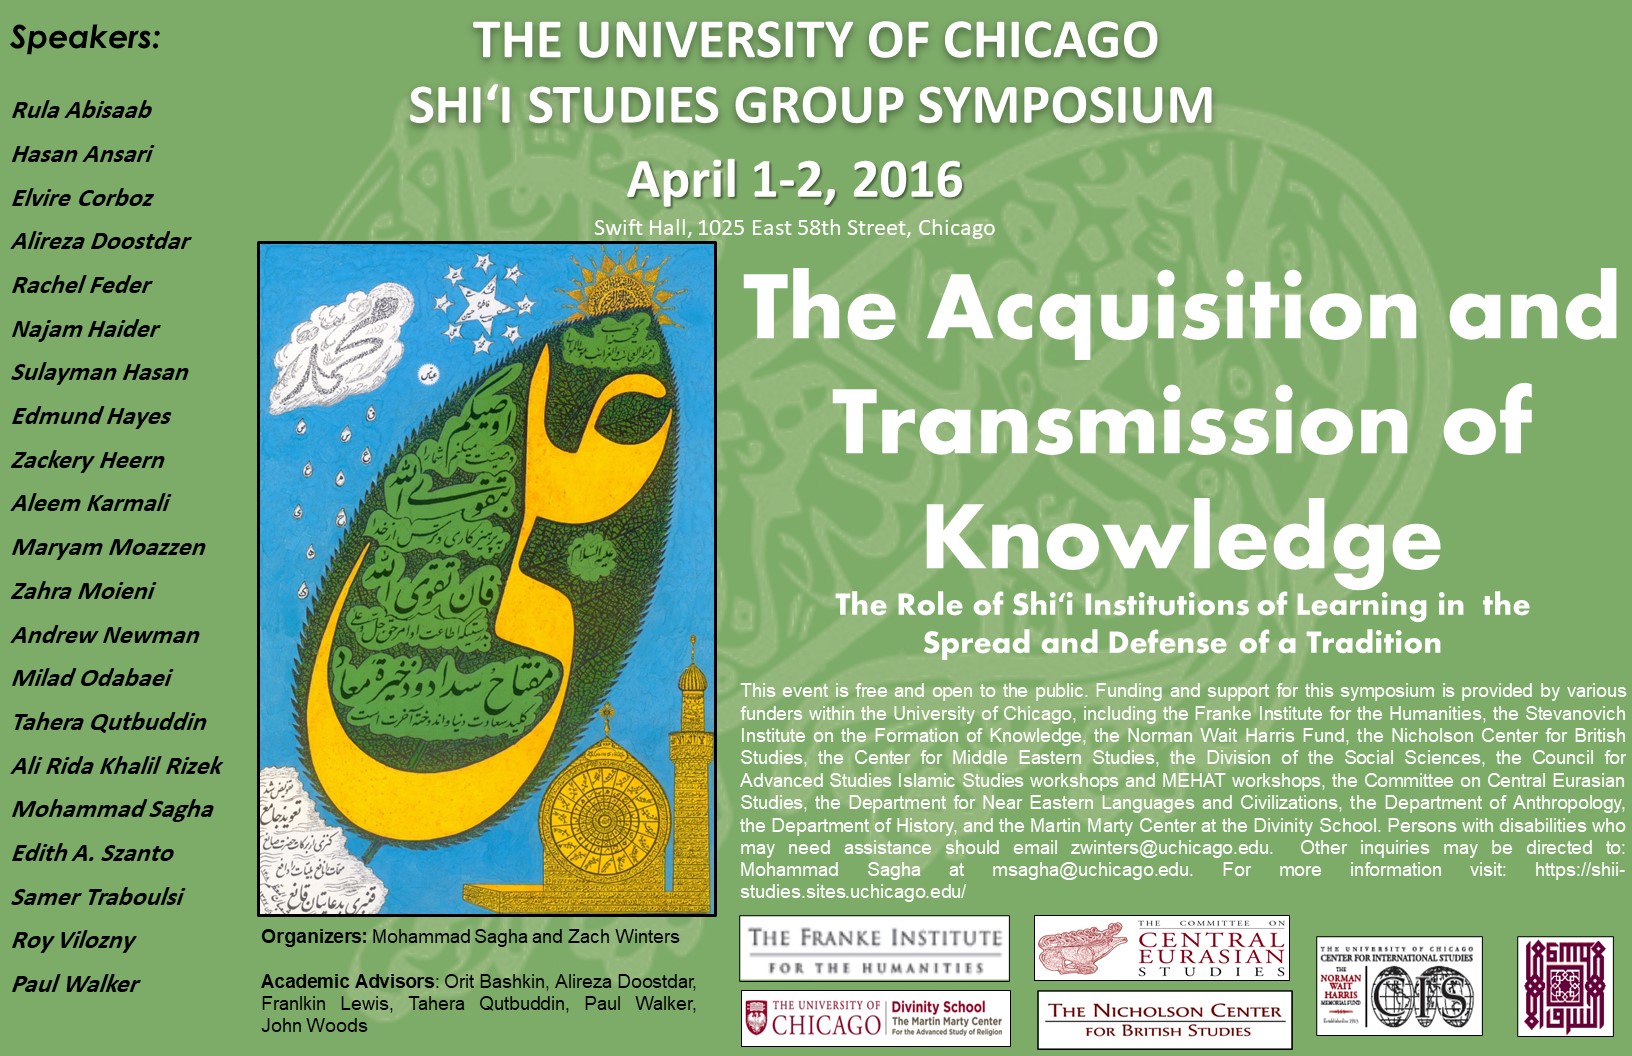 The Acquisition and Transmission of Knowledge